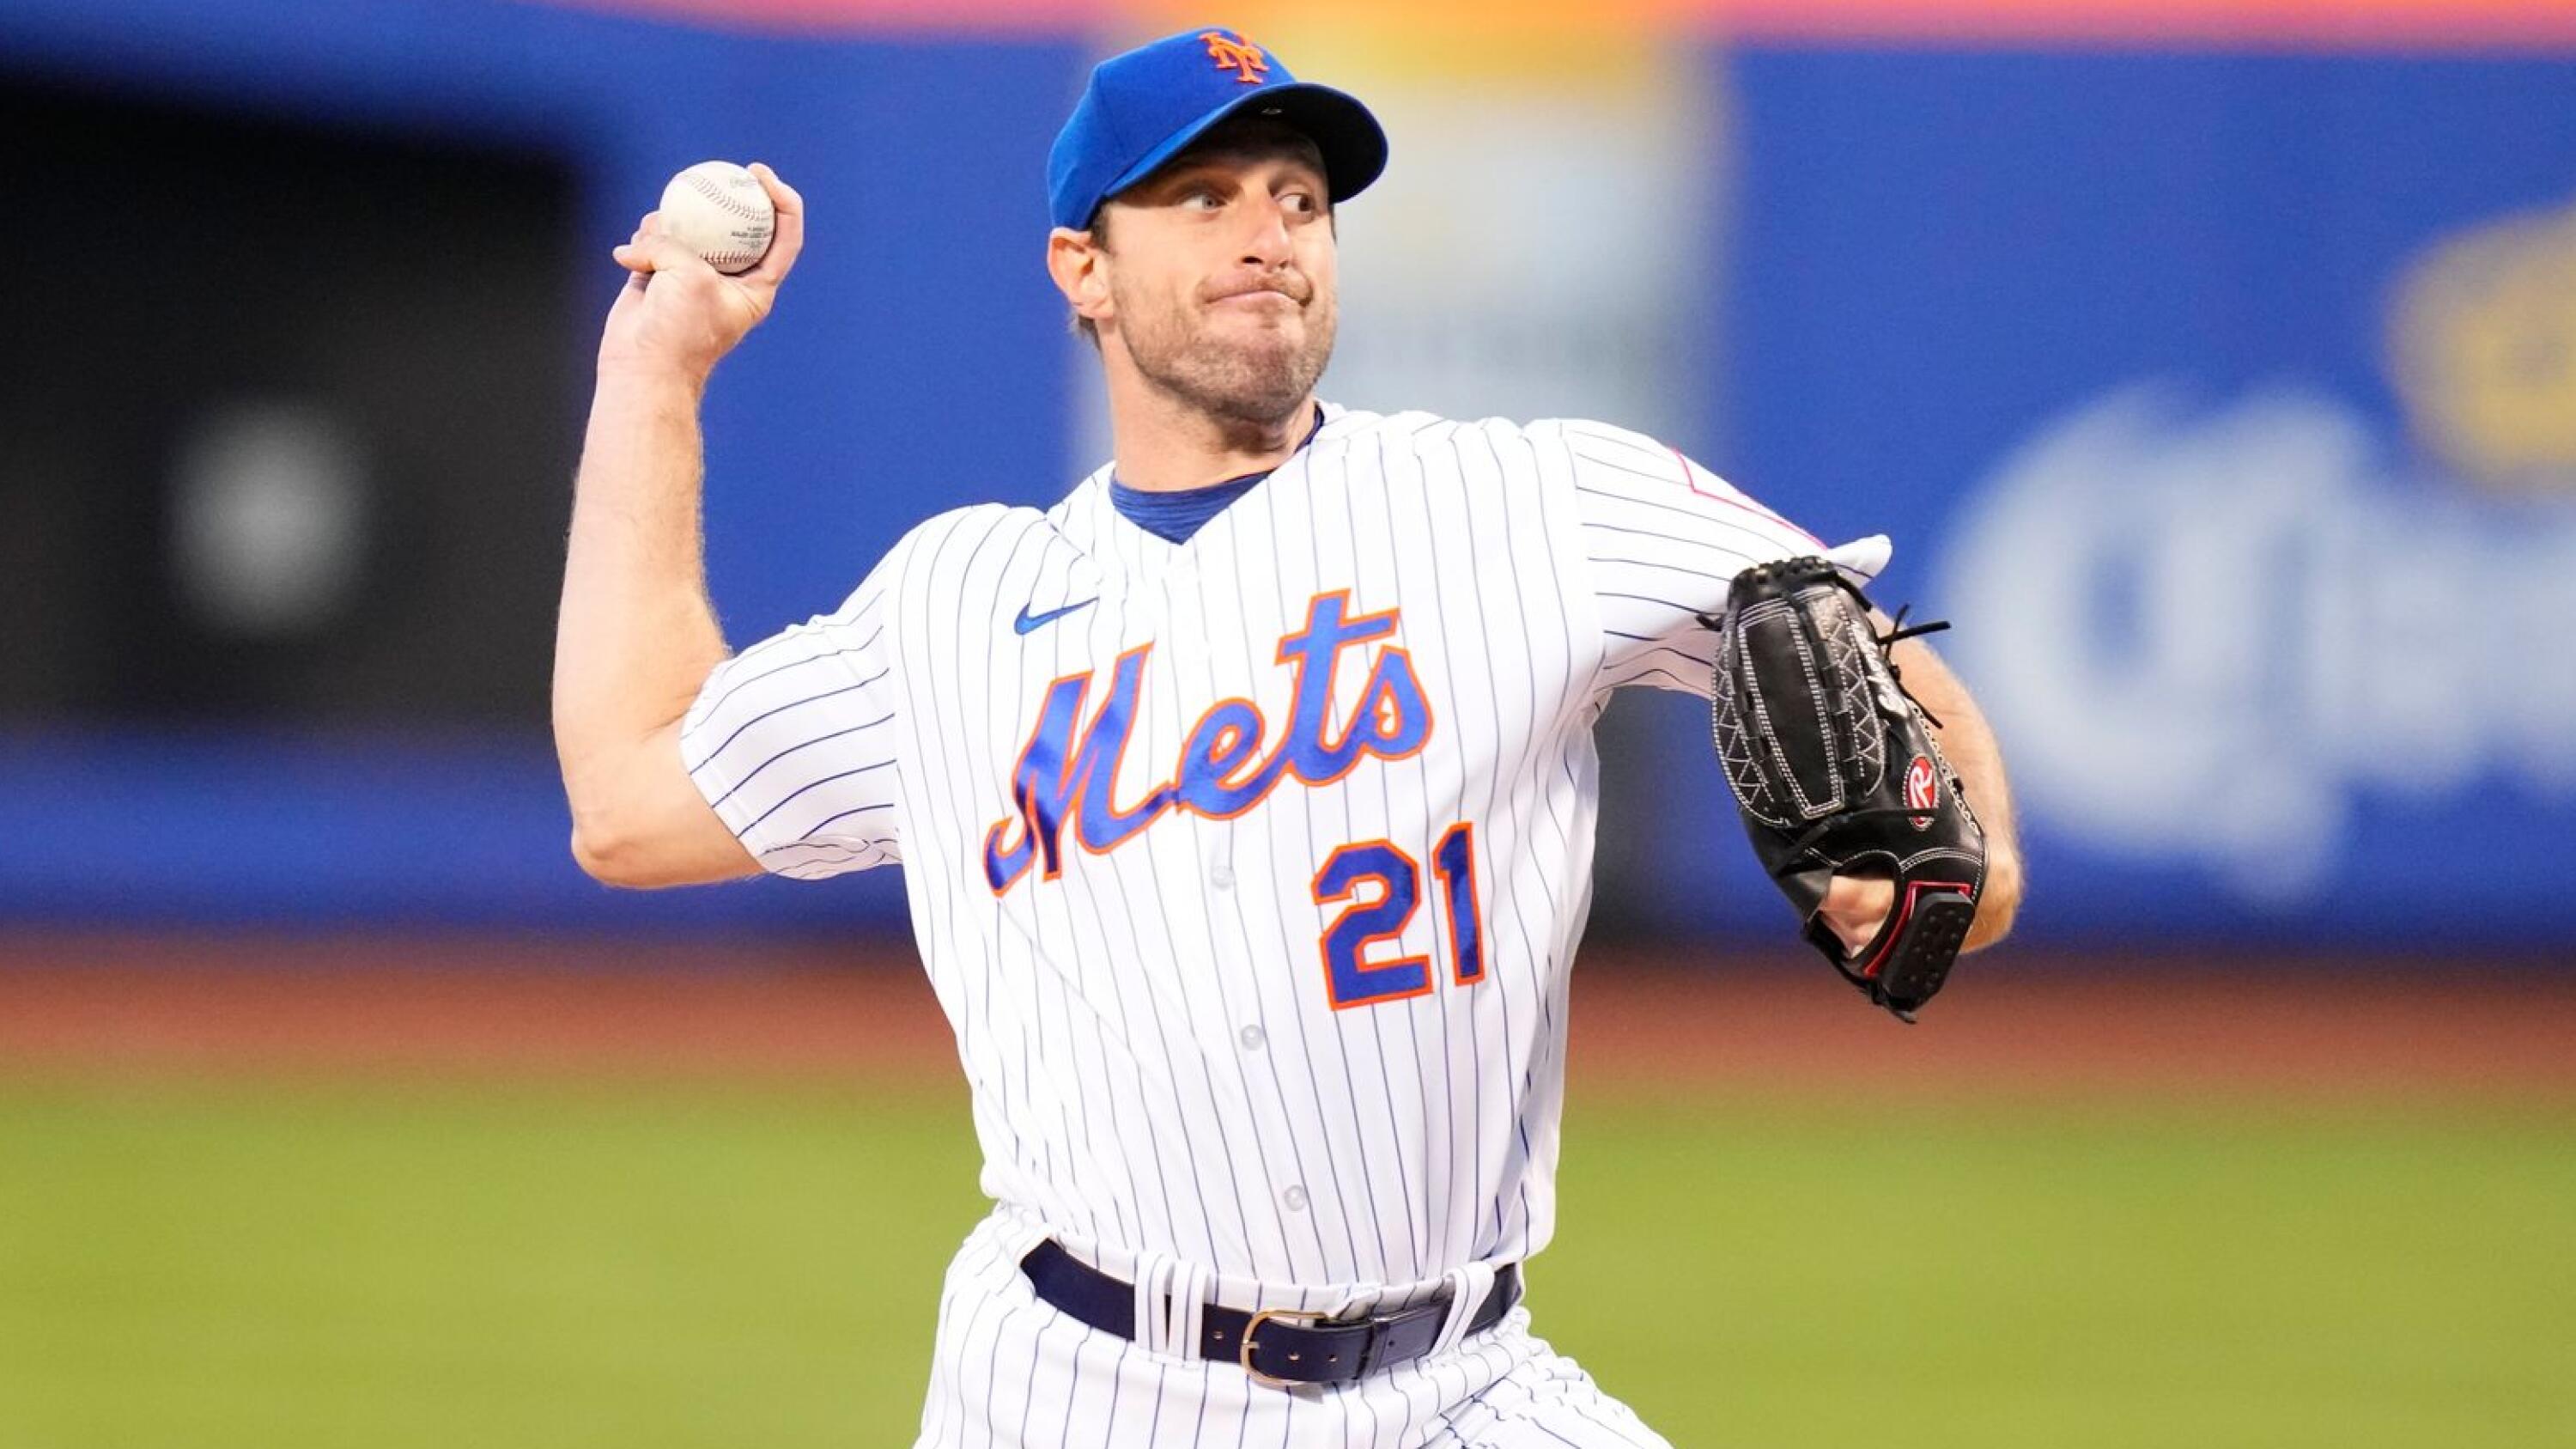 Max Scherzer's No-Hitter Will Cost the Mets - The New York Times